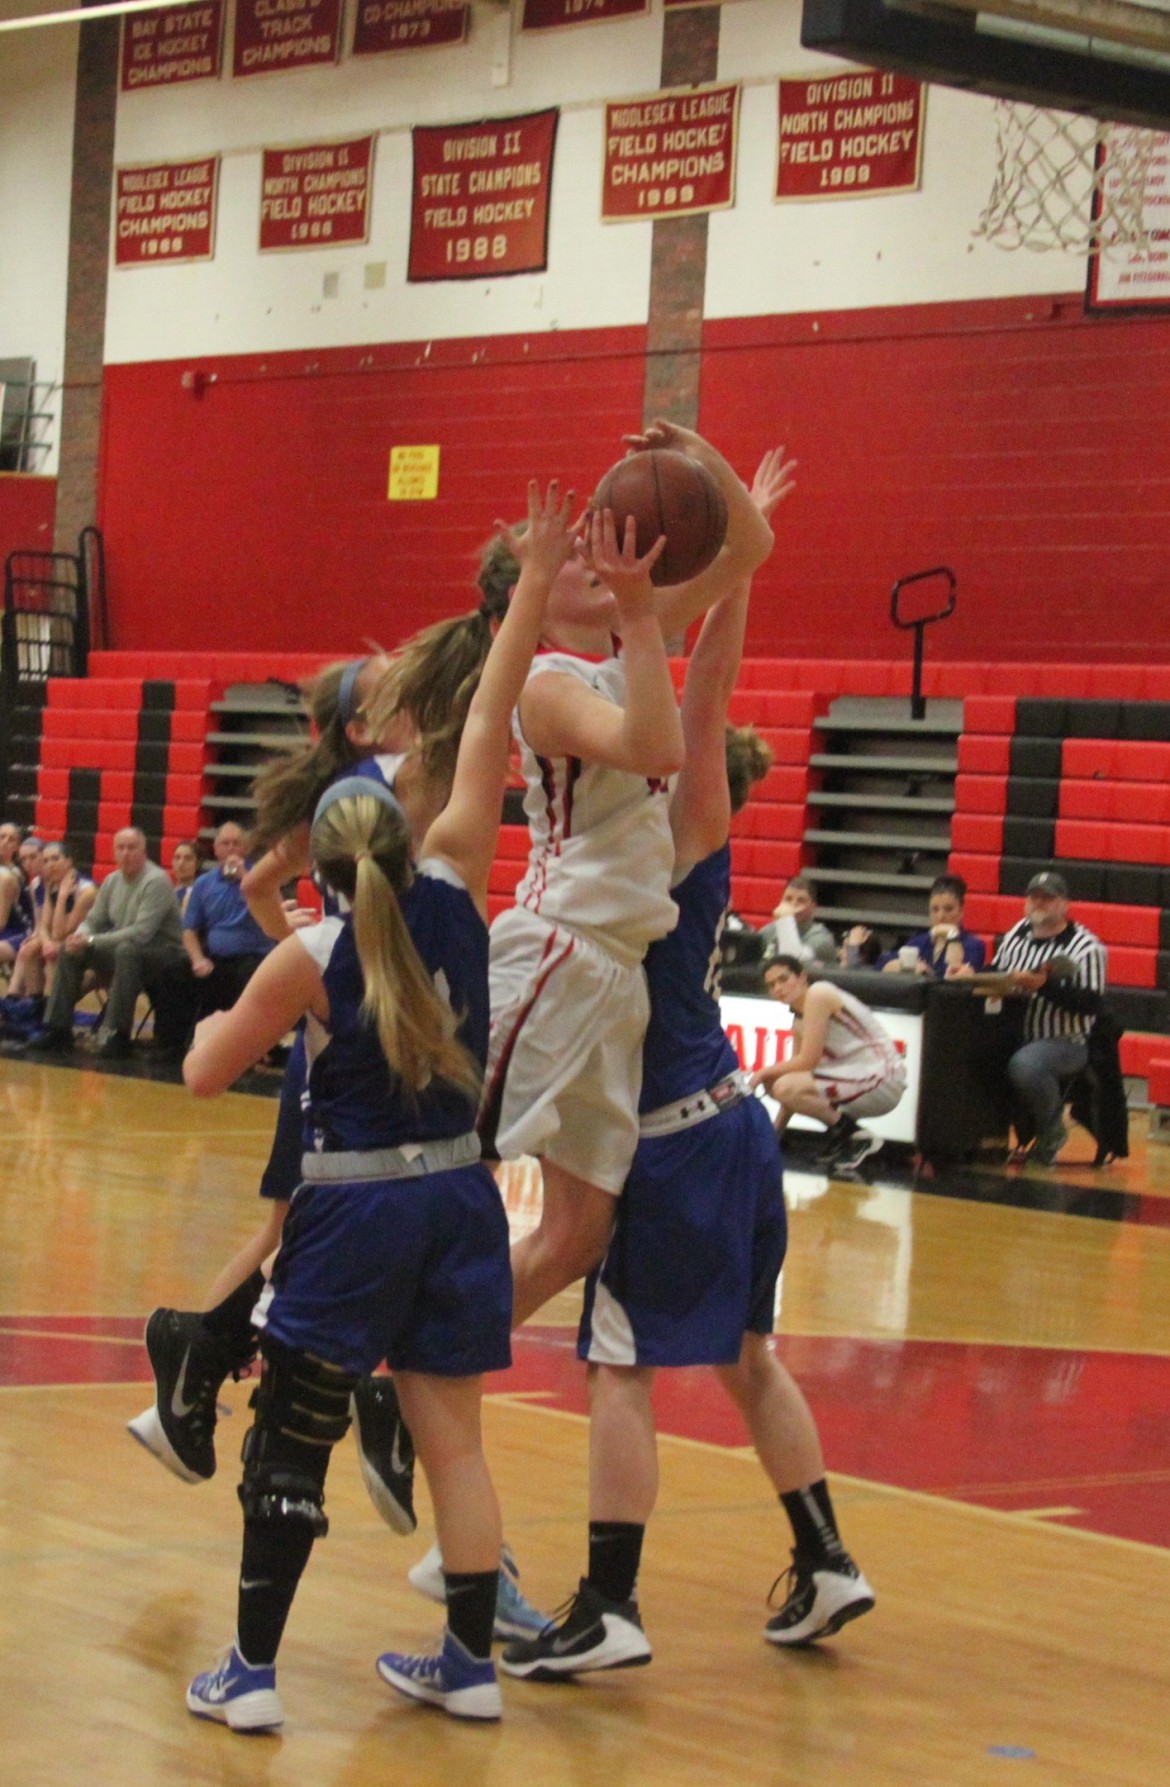 Junior center Shannon Murphy fights against Danver's defenders. She had 9 of Watertown's points in the 52-33 win.